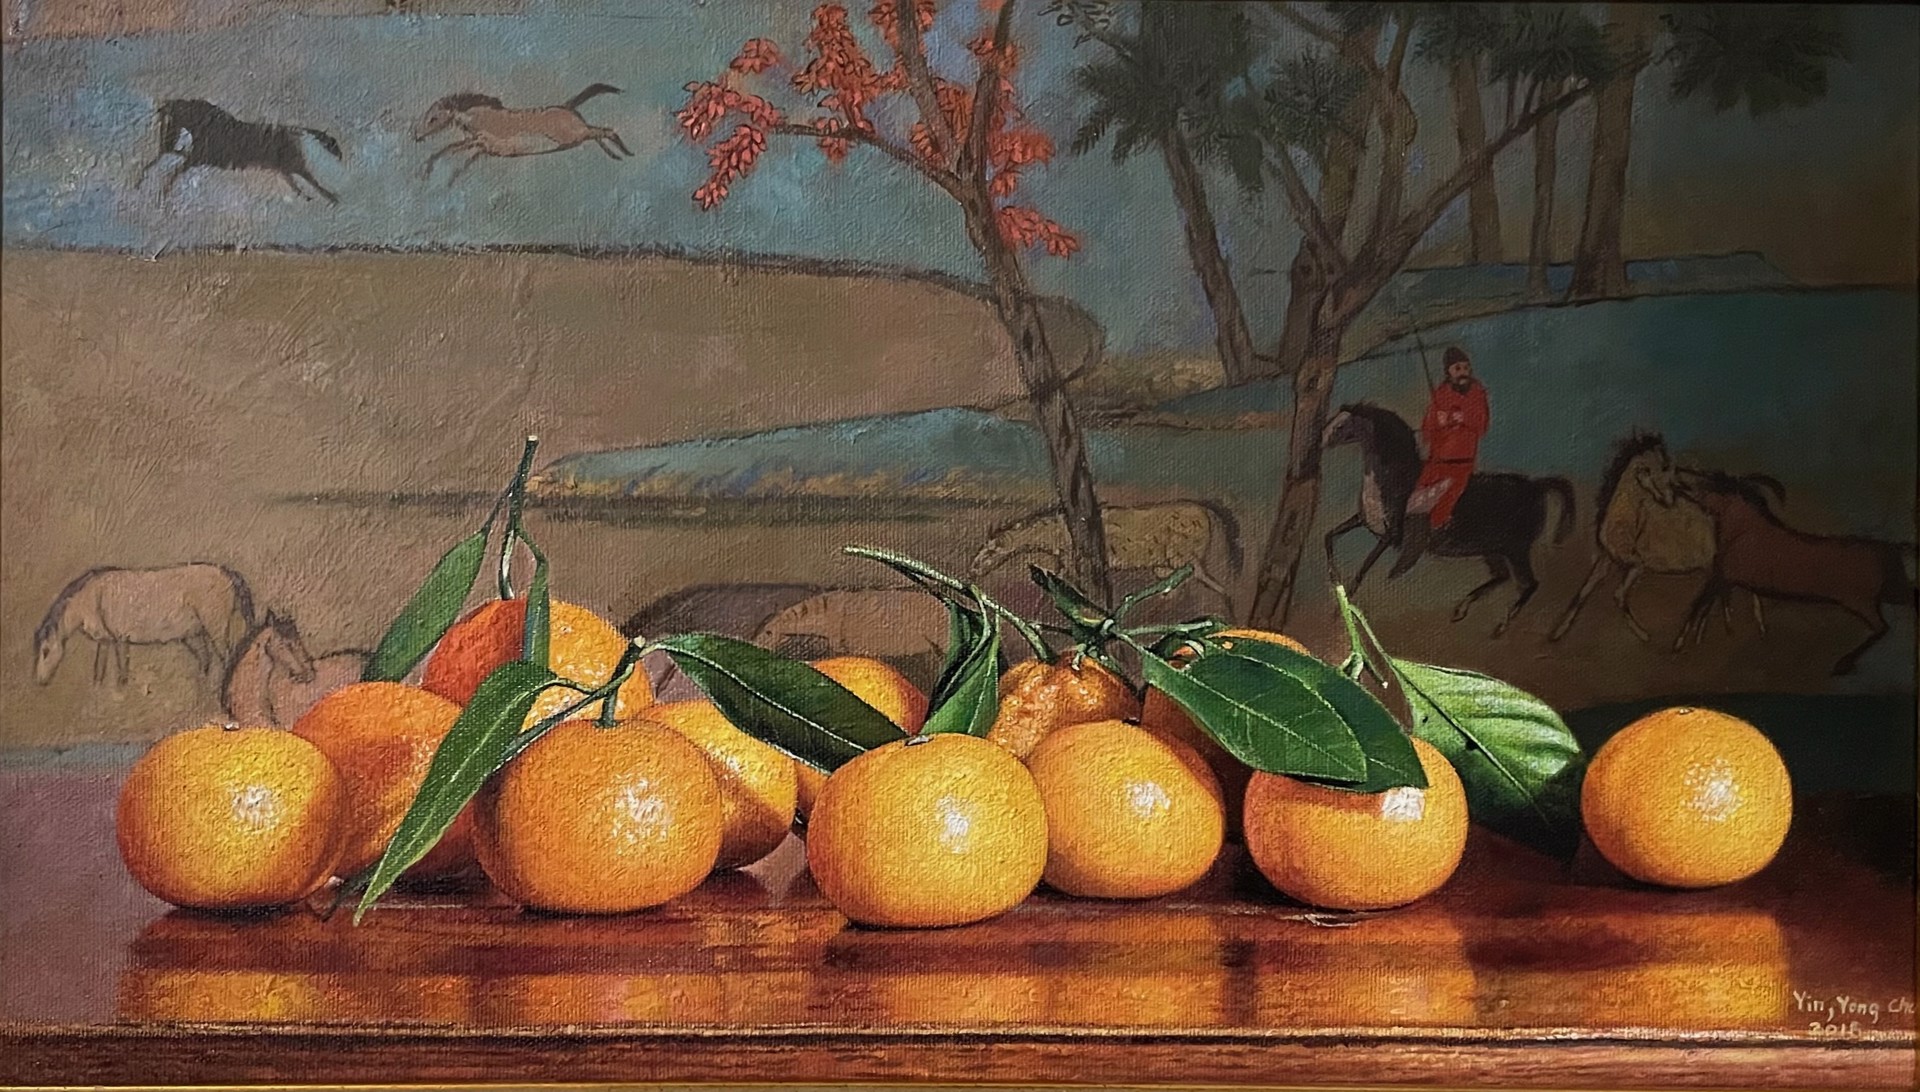 Oranges, Horses Playing and Drinking Water, Yuan Dynasty by Yin Yong Chun